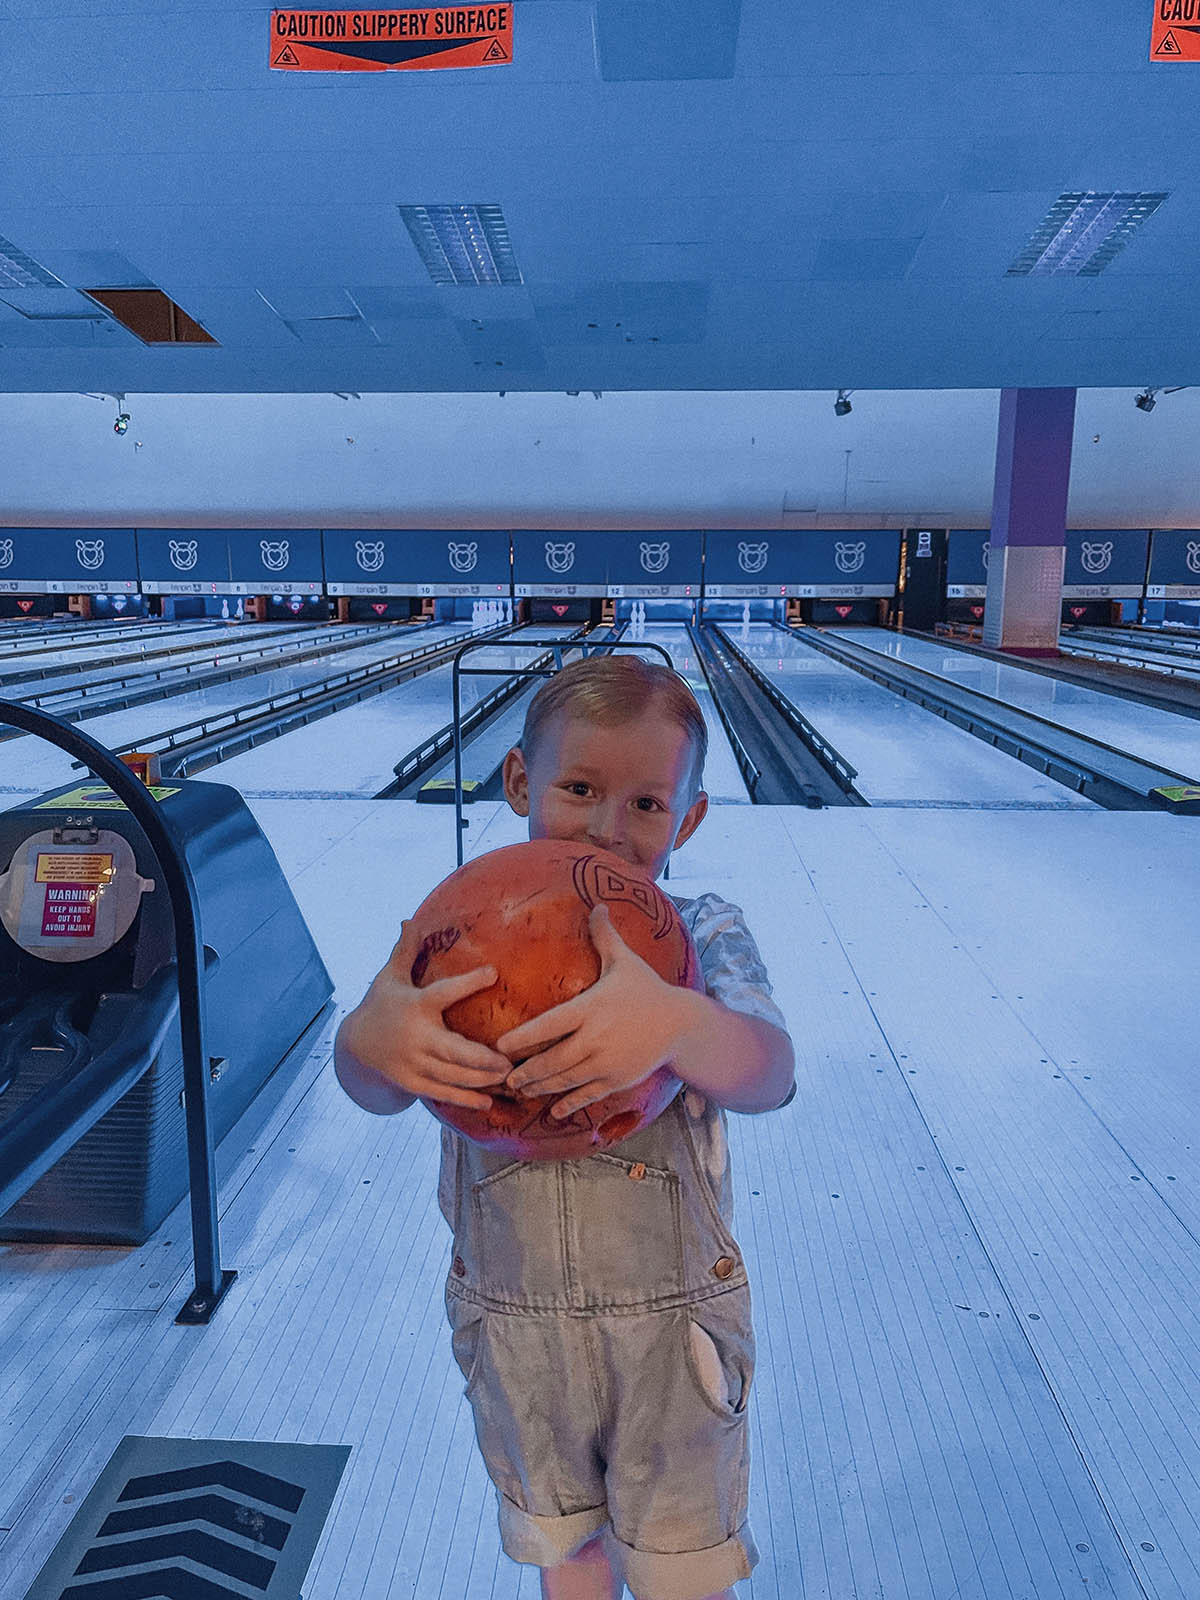 tenpin york review family evening family fun date night social arcades bowling alley yorkshire